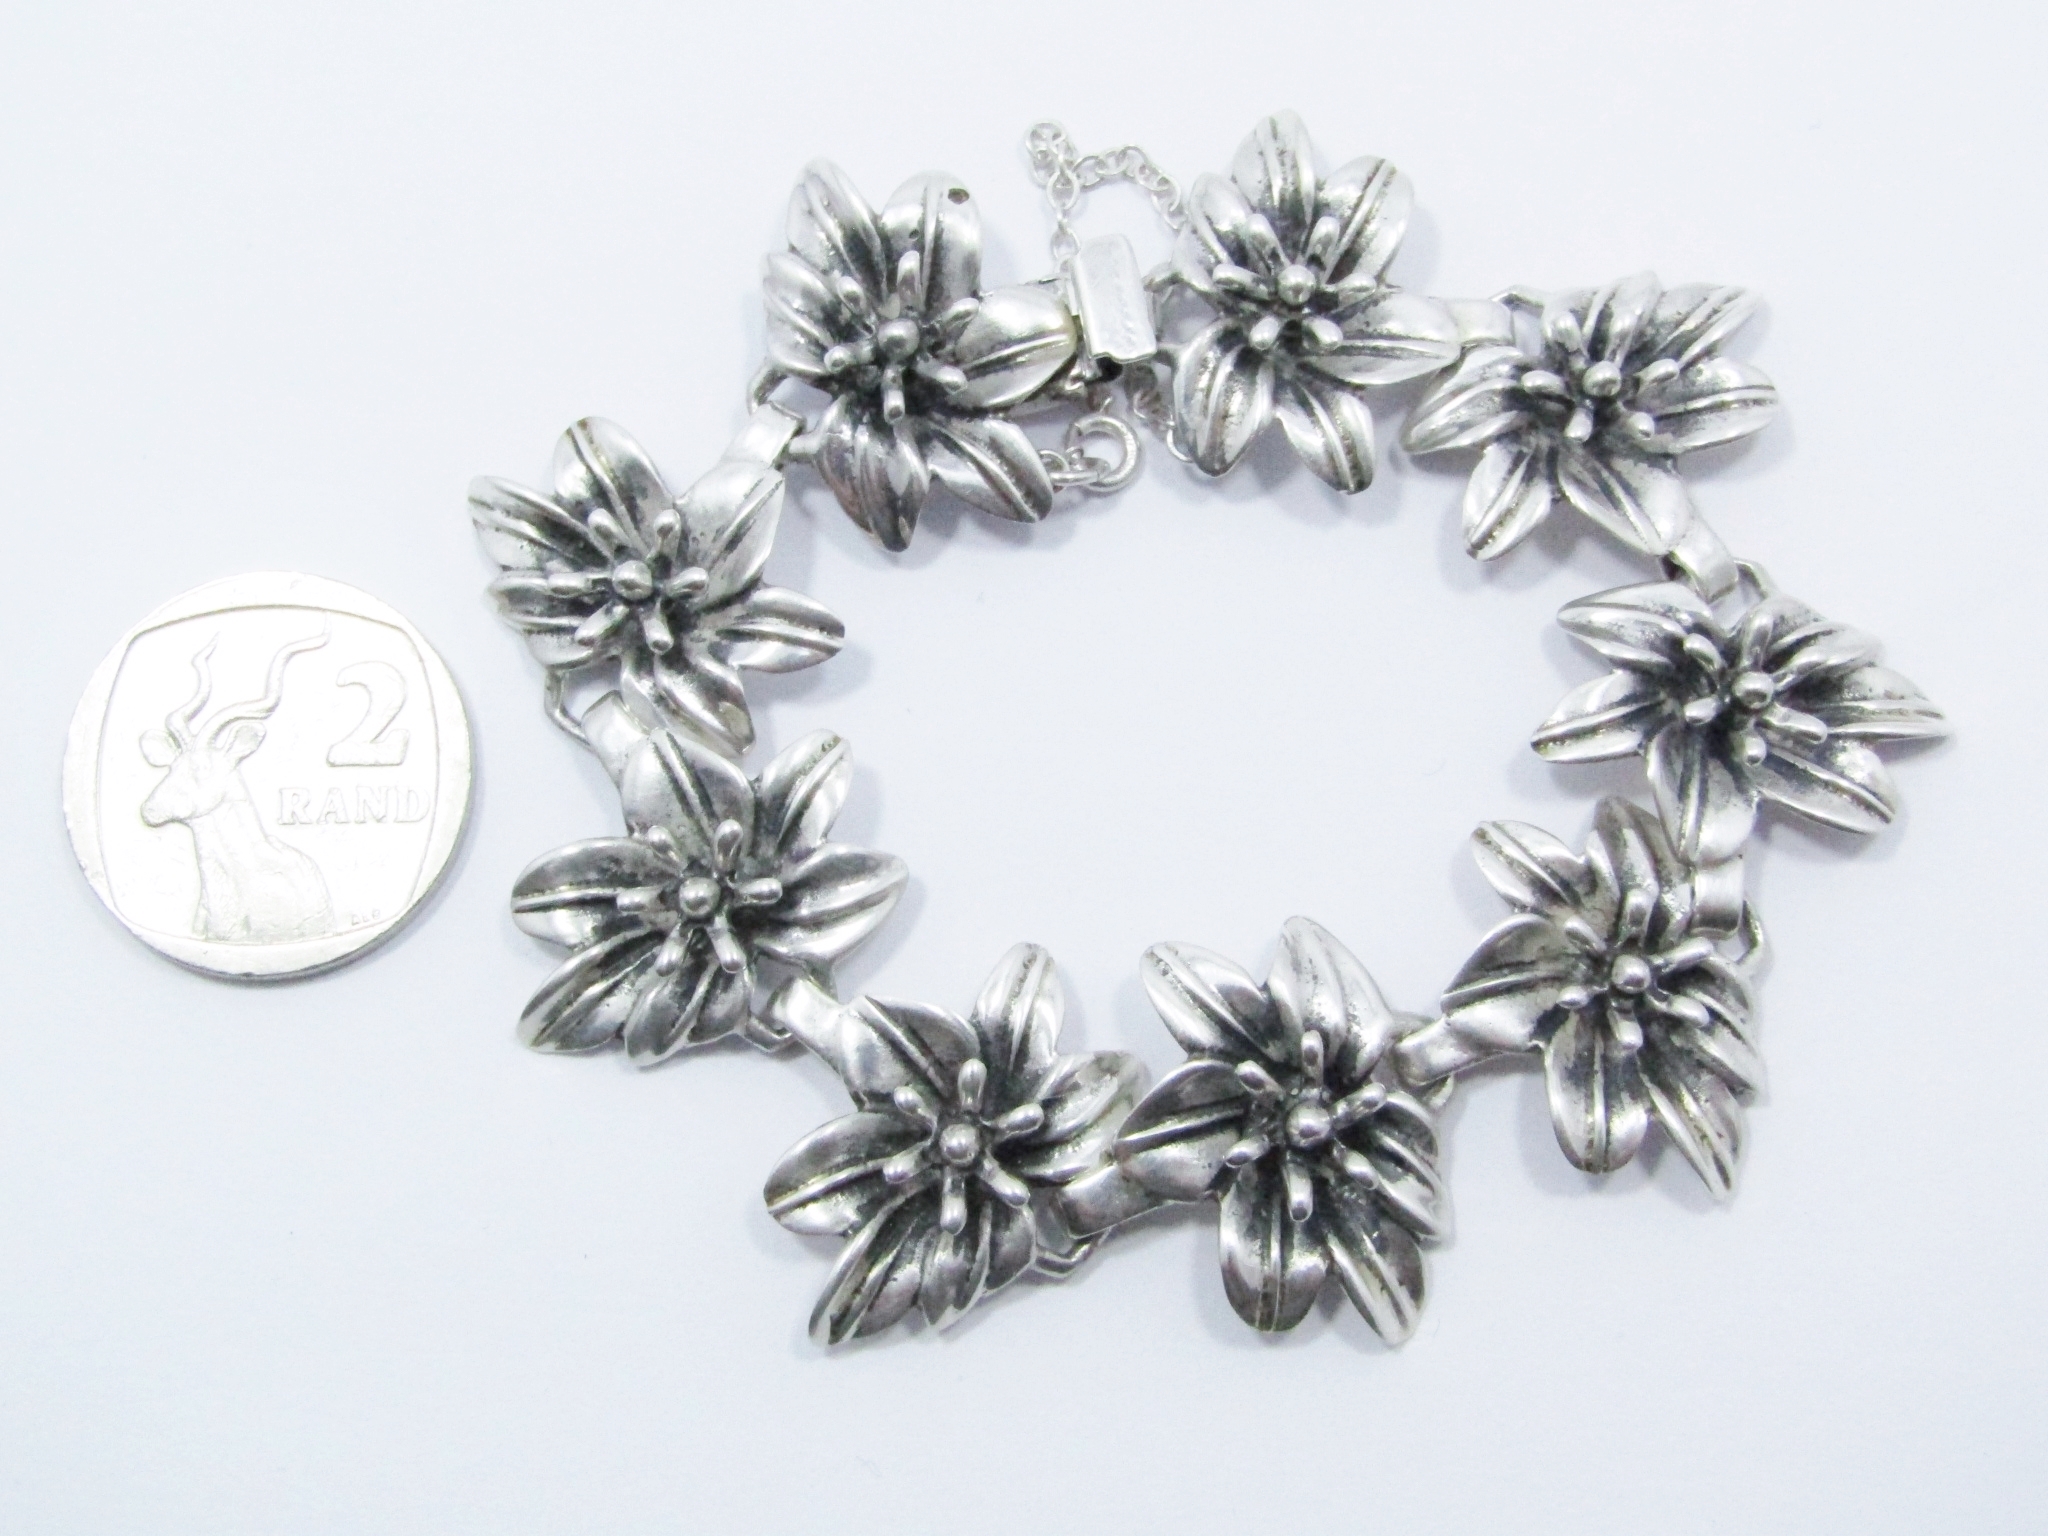 A Gorgeous Weighty Vintage Flower Bracelet in Sterling Silver.